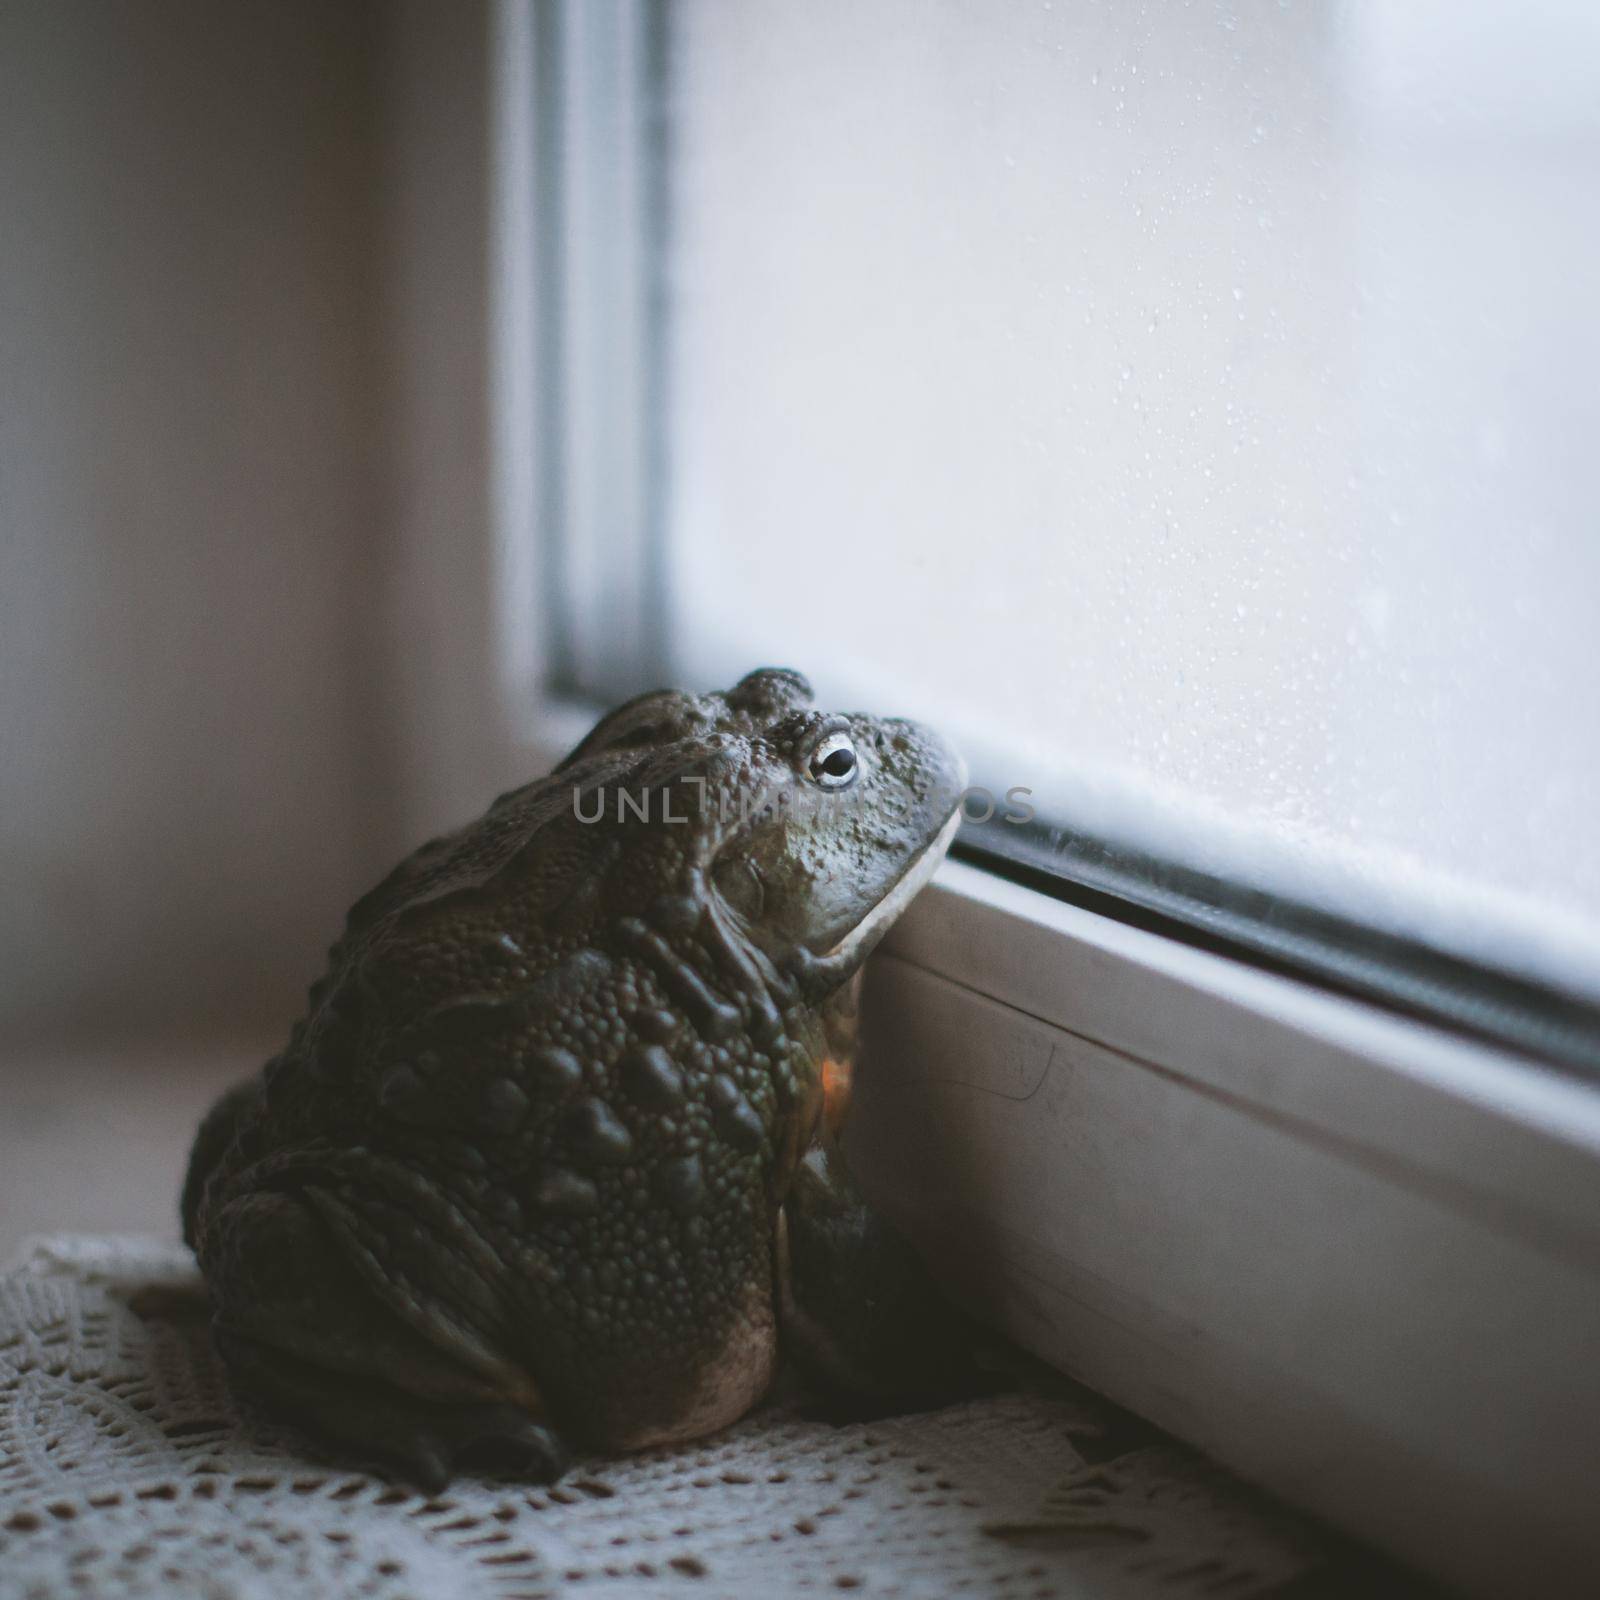 The African bullfrog, adult male sitting in front of window by RosaJay